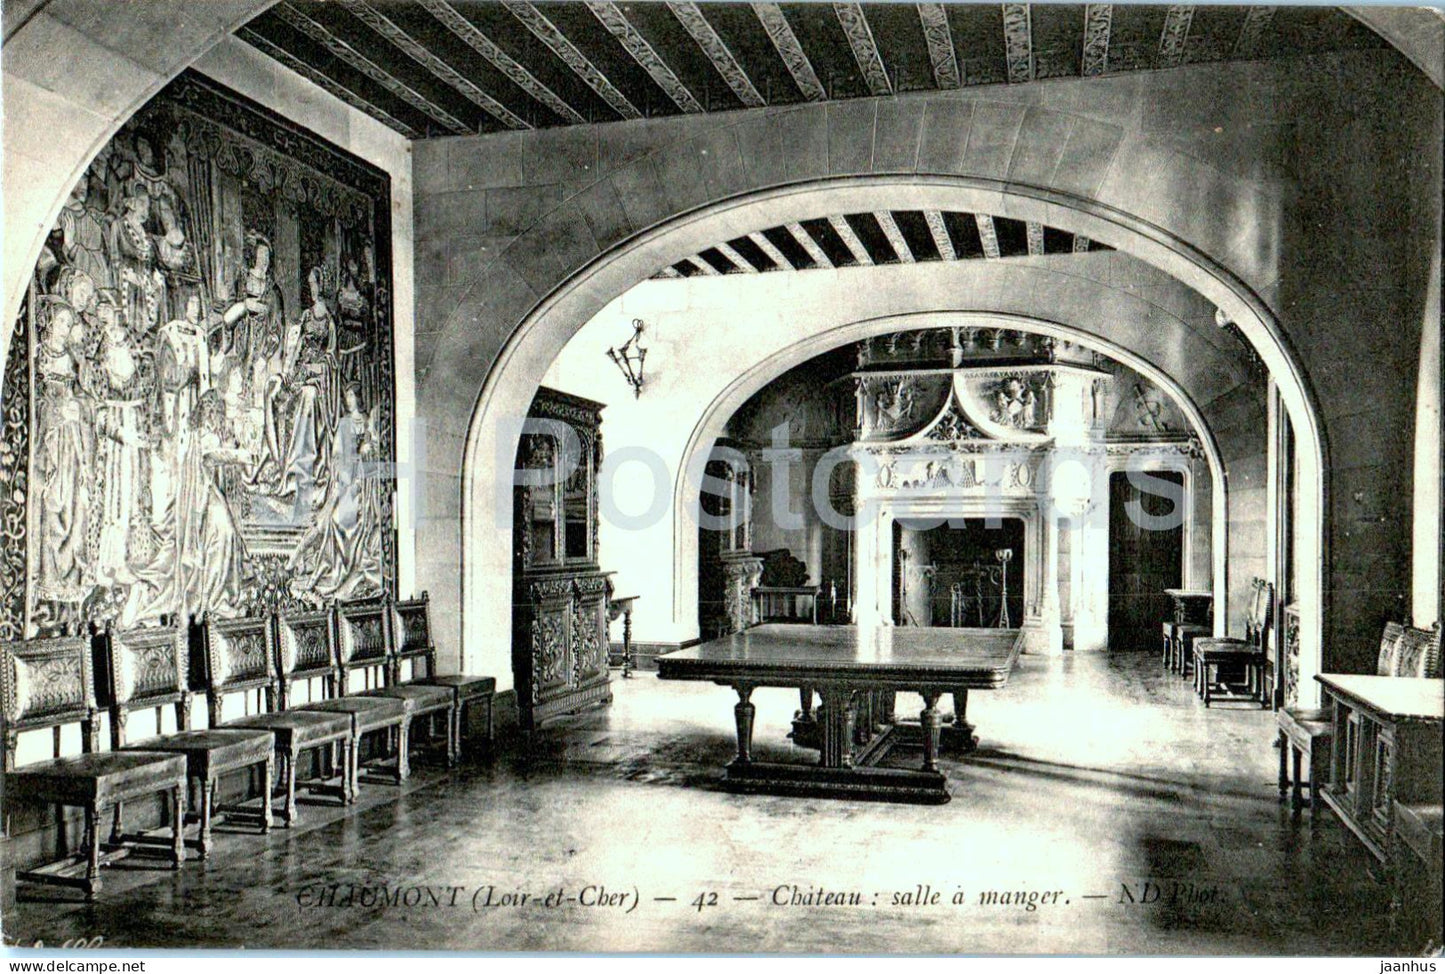 Chaumont - Chateau salle a manger - castle - 42 - old postcard - France - used - JH Postcards